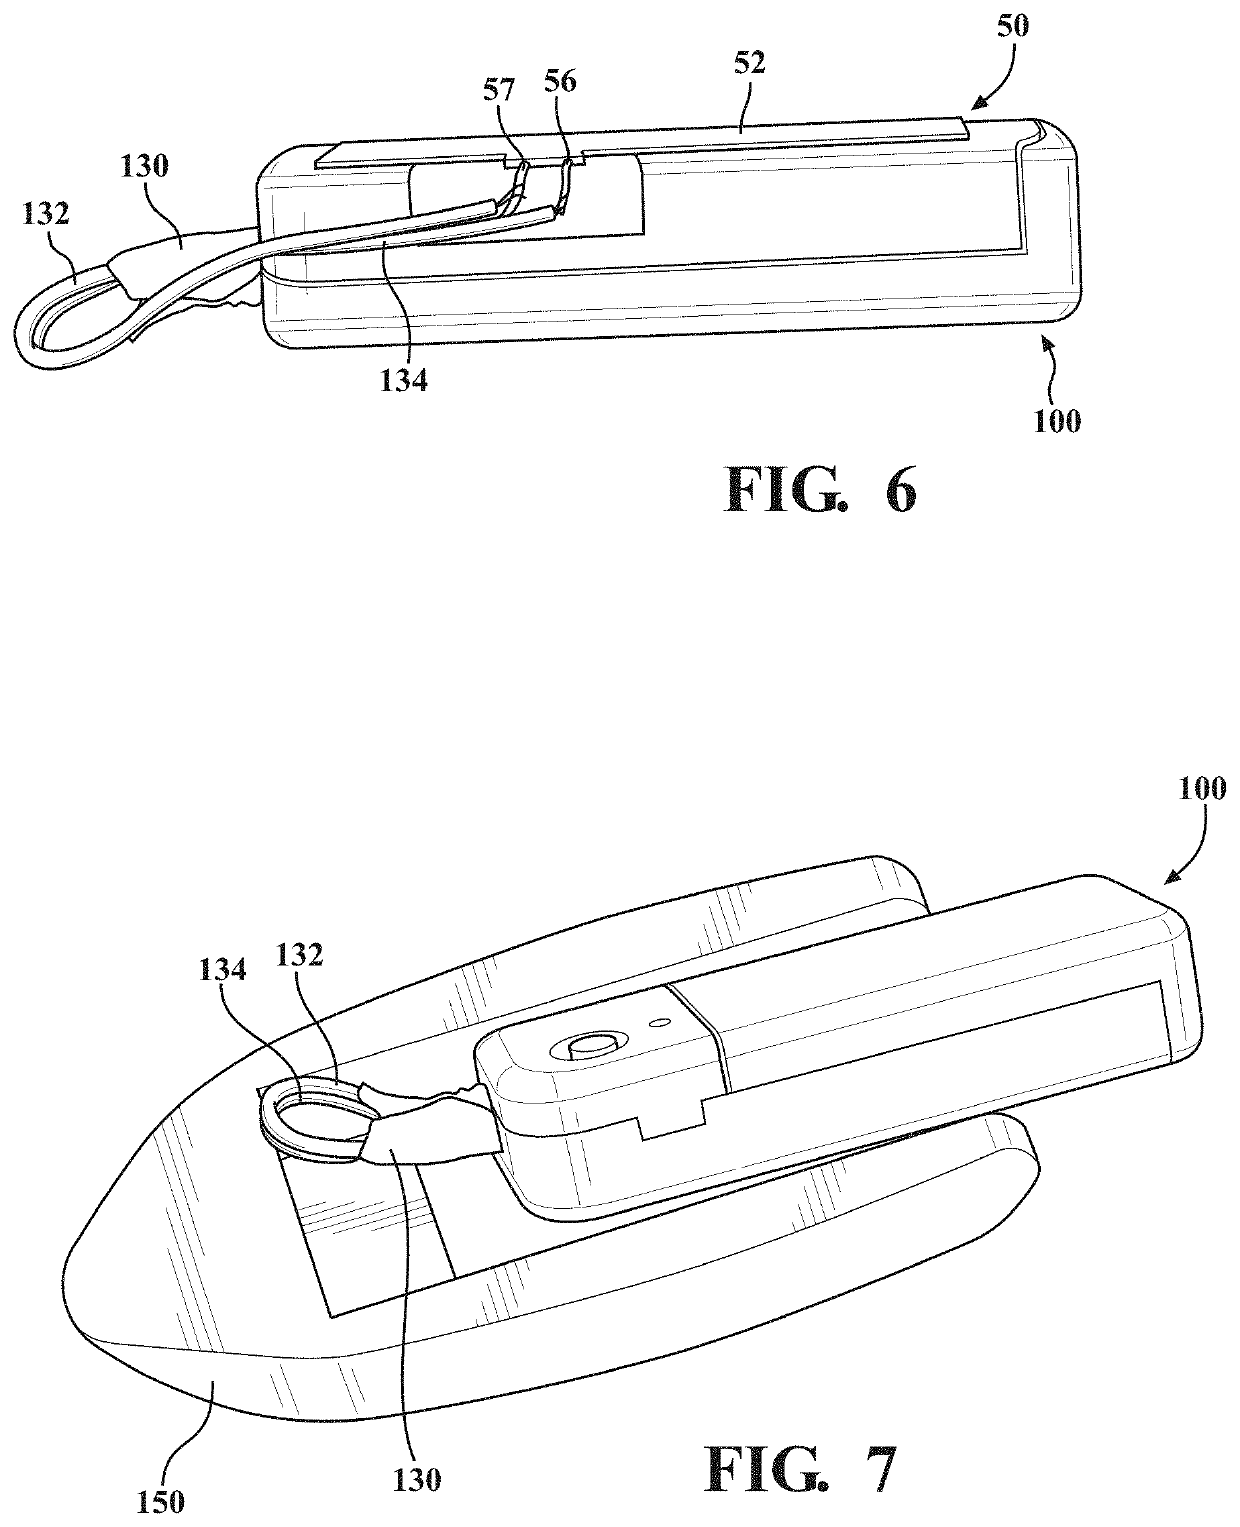 Portable Pain Relief Device Utilizing Polymer Based Materials or a Combination of EL Material and Polymer Based Materials